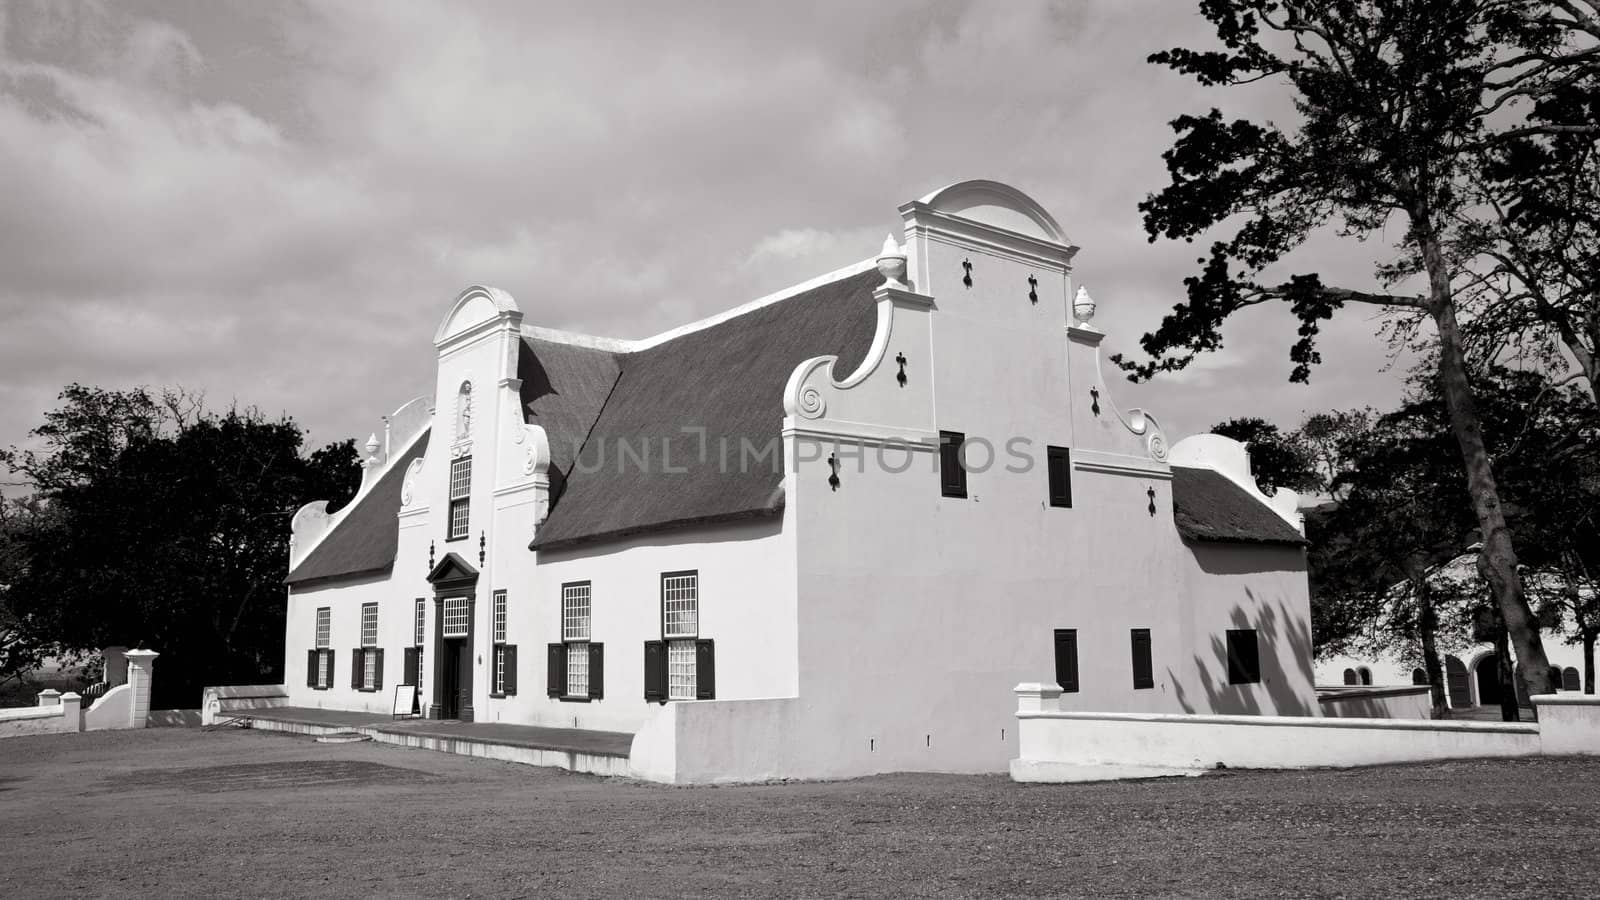 Groot Constantia, the finest surviving example of Cape Dutch architecture, and one of South Africa’s foremost historical monuments and tourist attractions.